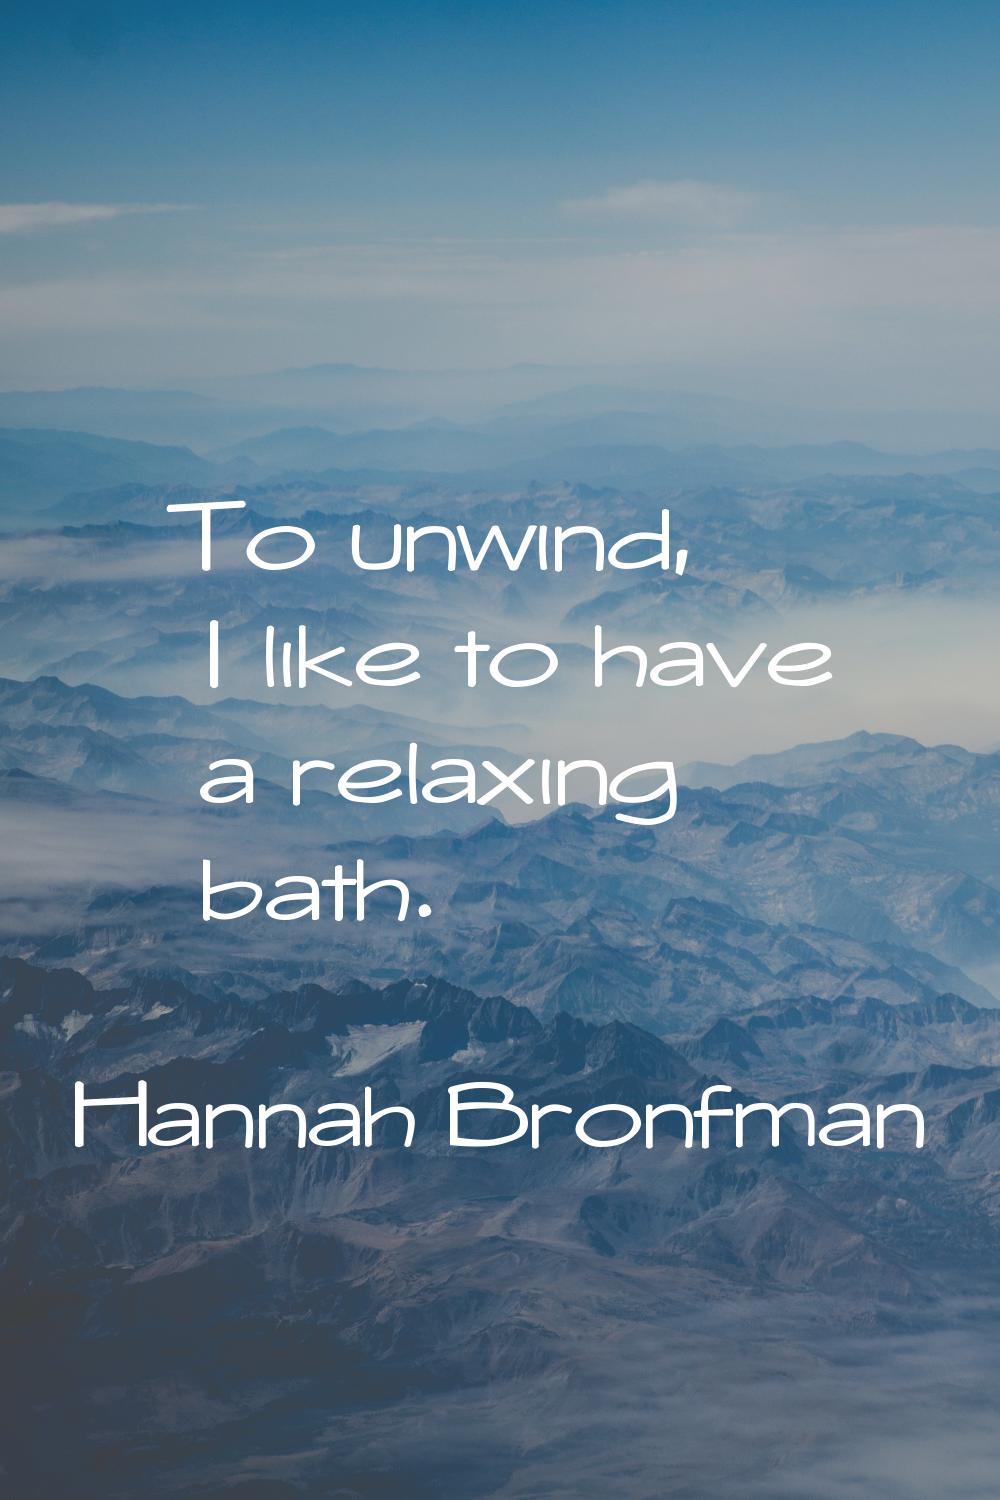 To unwind, I like to have a relaxing bath.